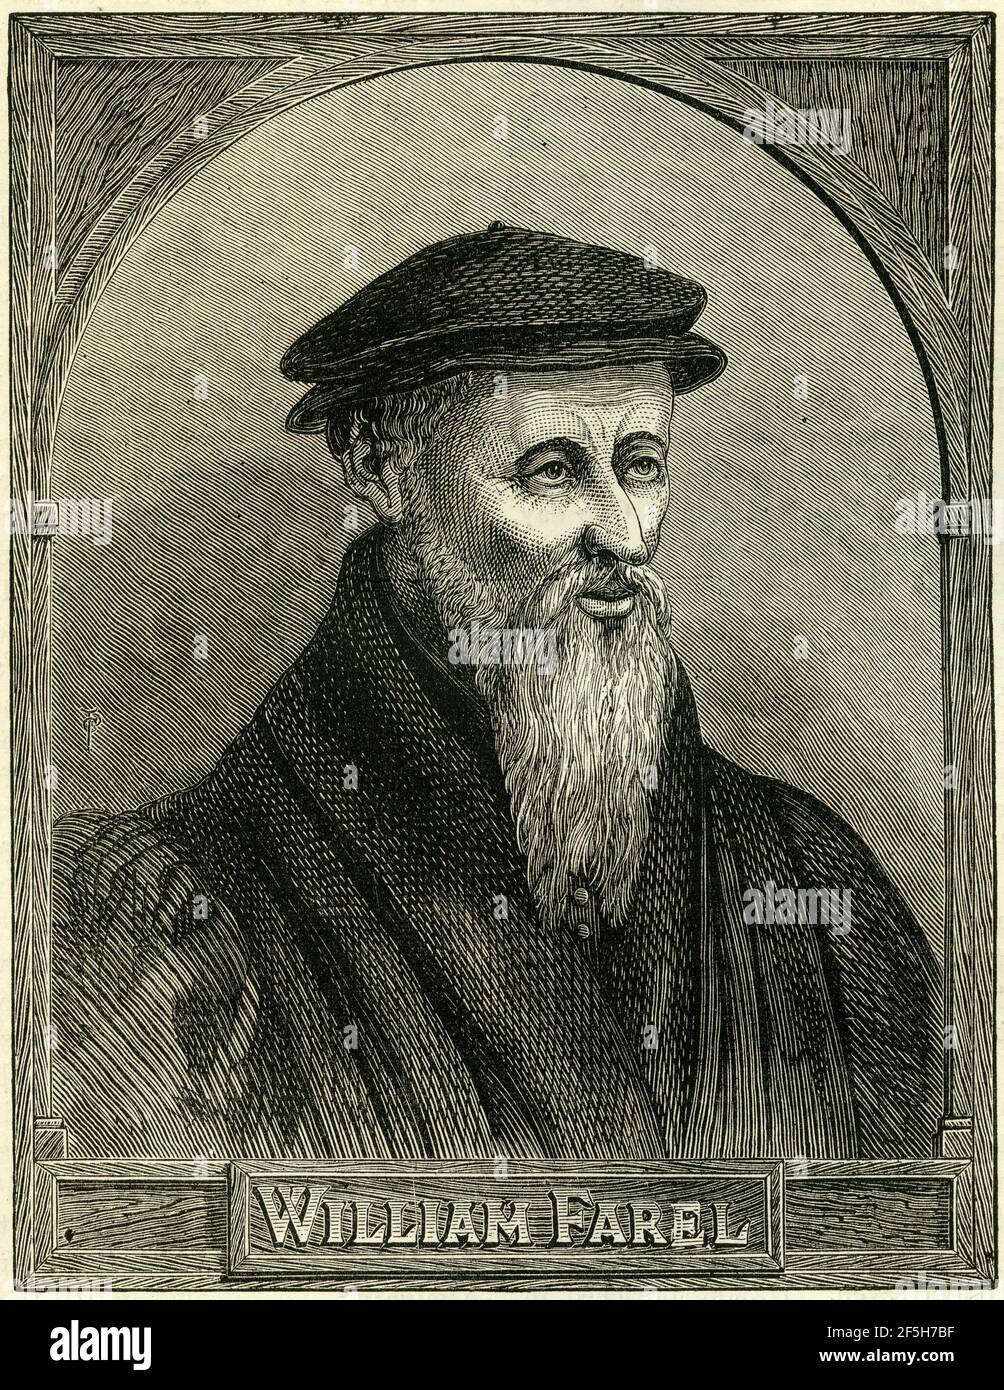 Engraving of William Farel (1489 – 1565), Guilhem Farel or Guillaume Farel:  French evangelist, Protestant reformer and a founder of the Reformed Church  in the Principality of Neuchâtel, in the Republic of